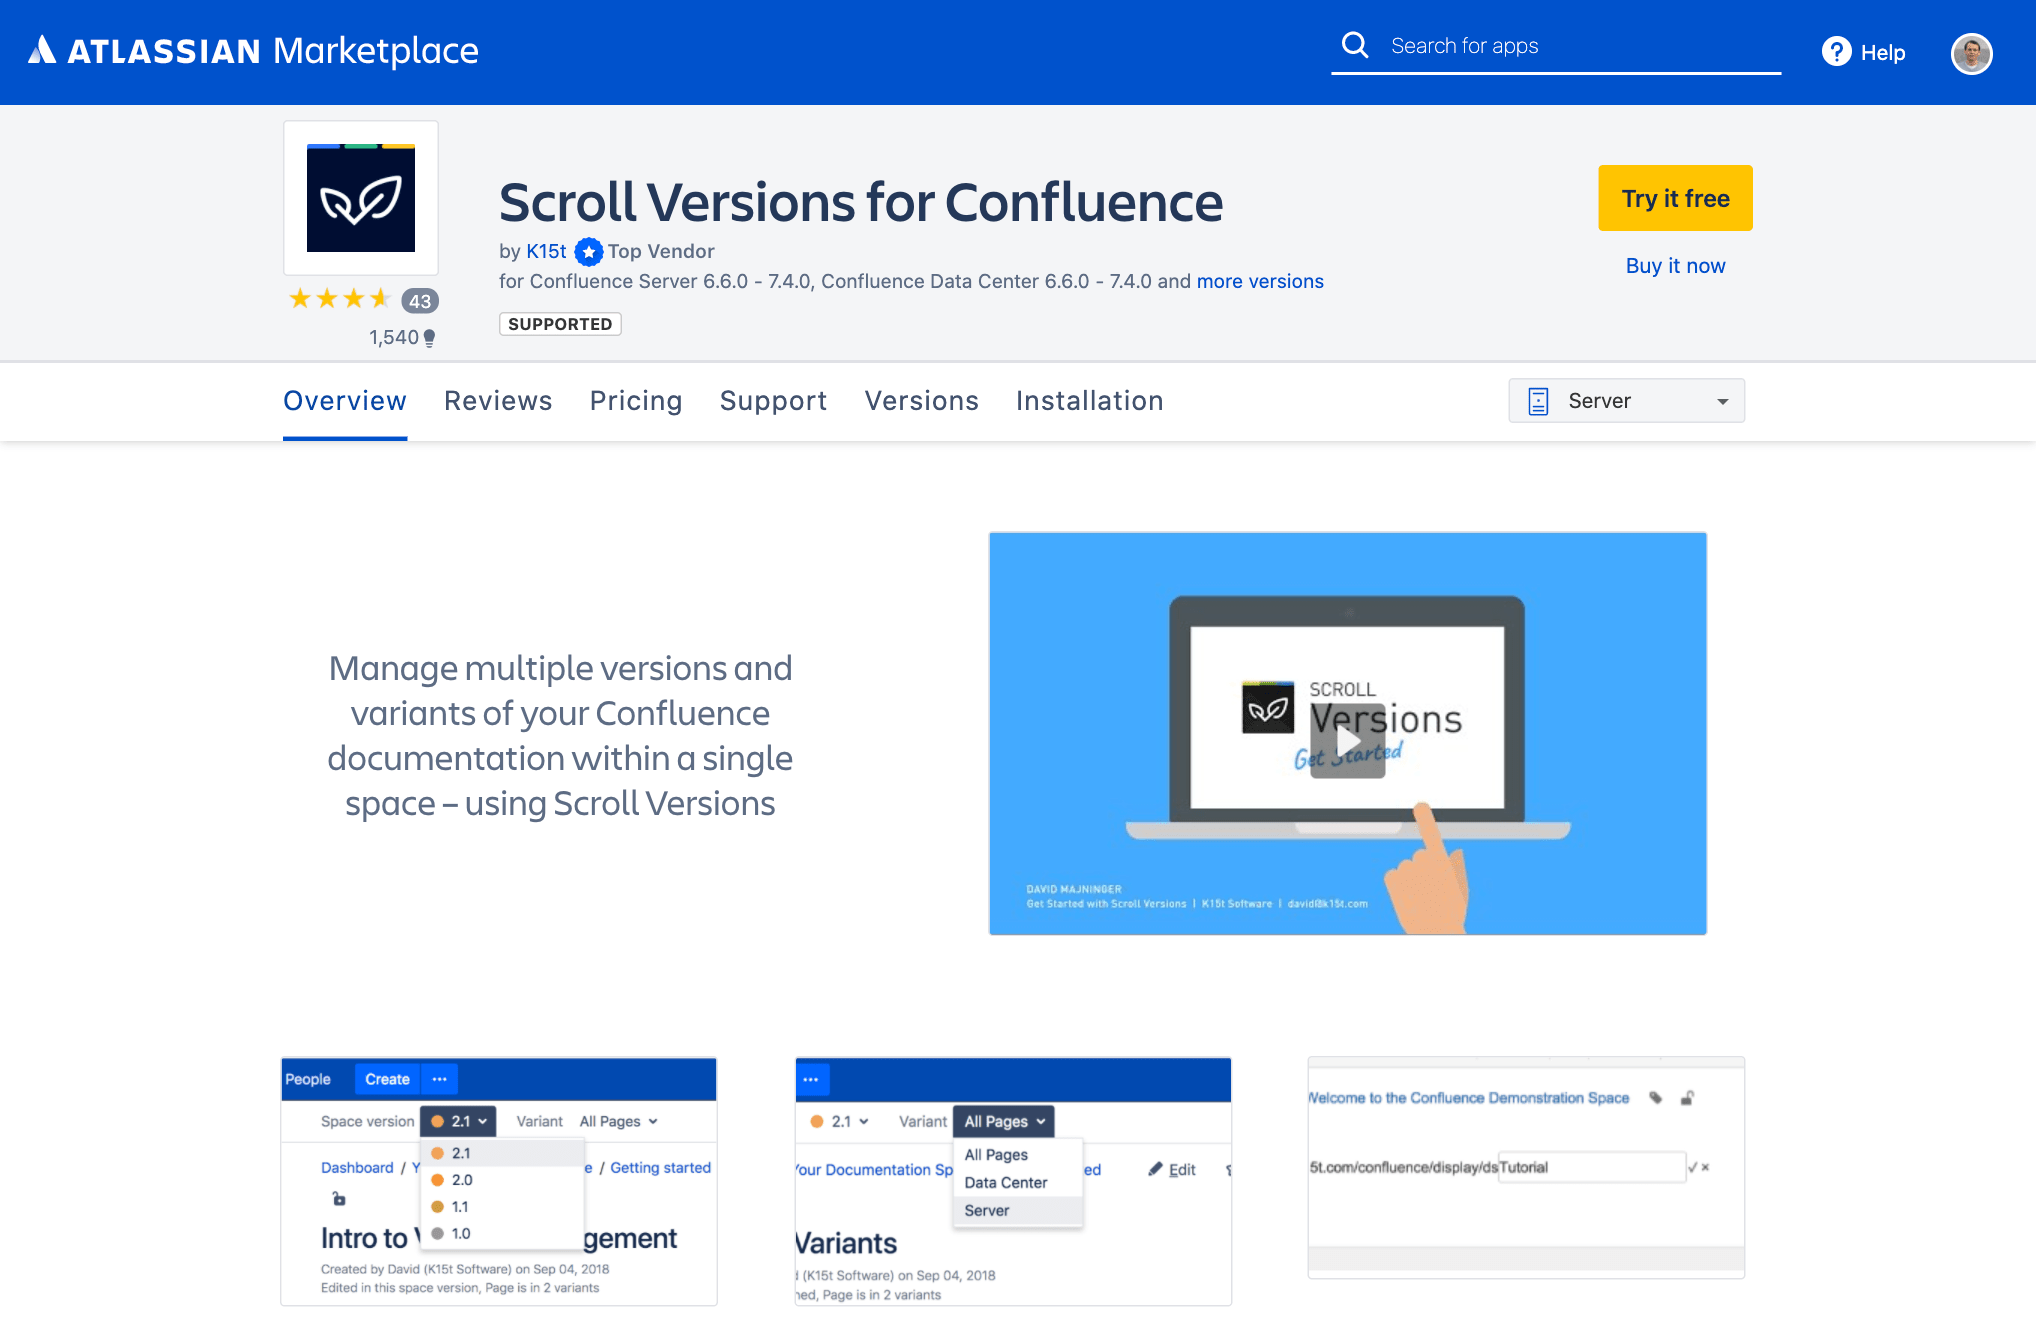 Scroll Versions for Confluence